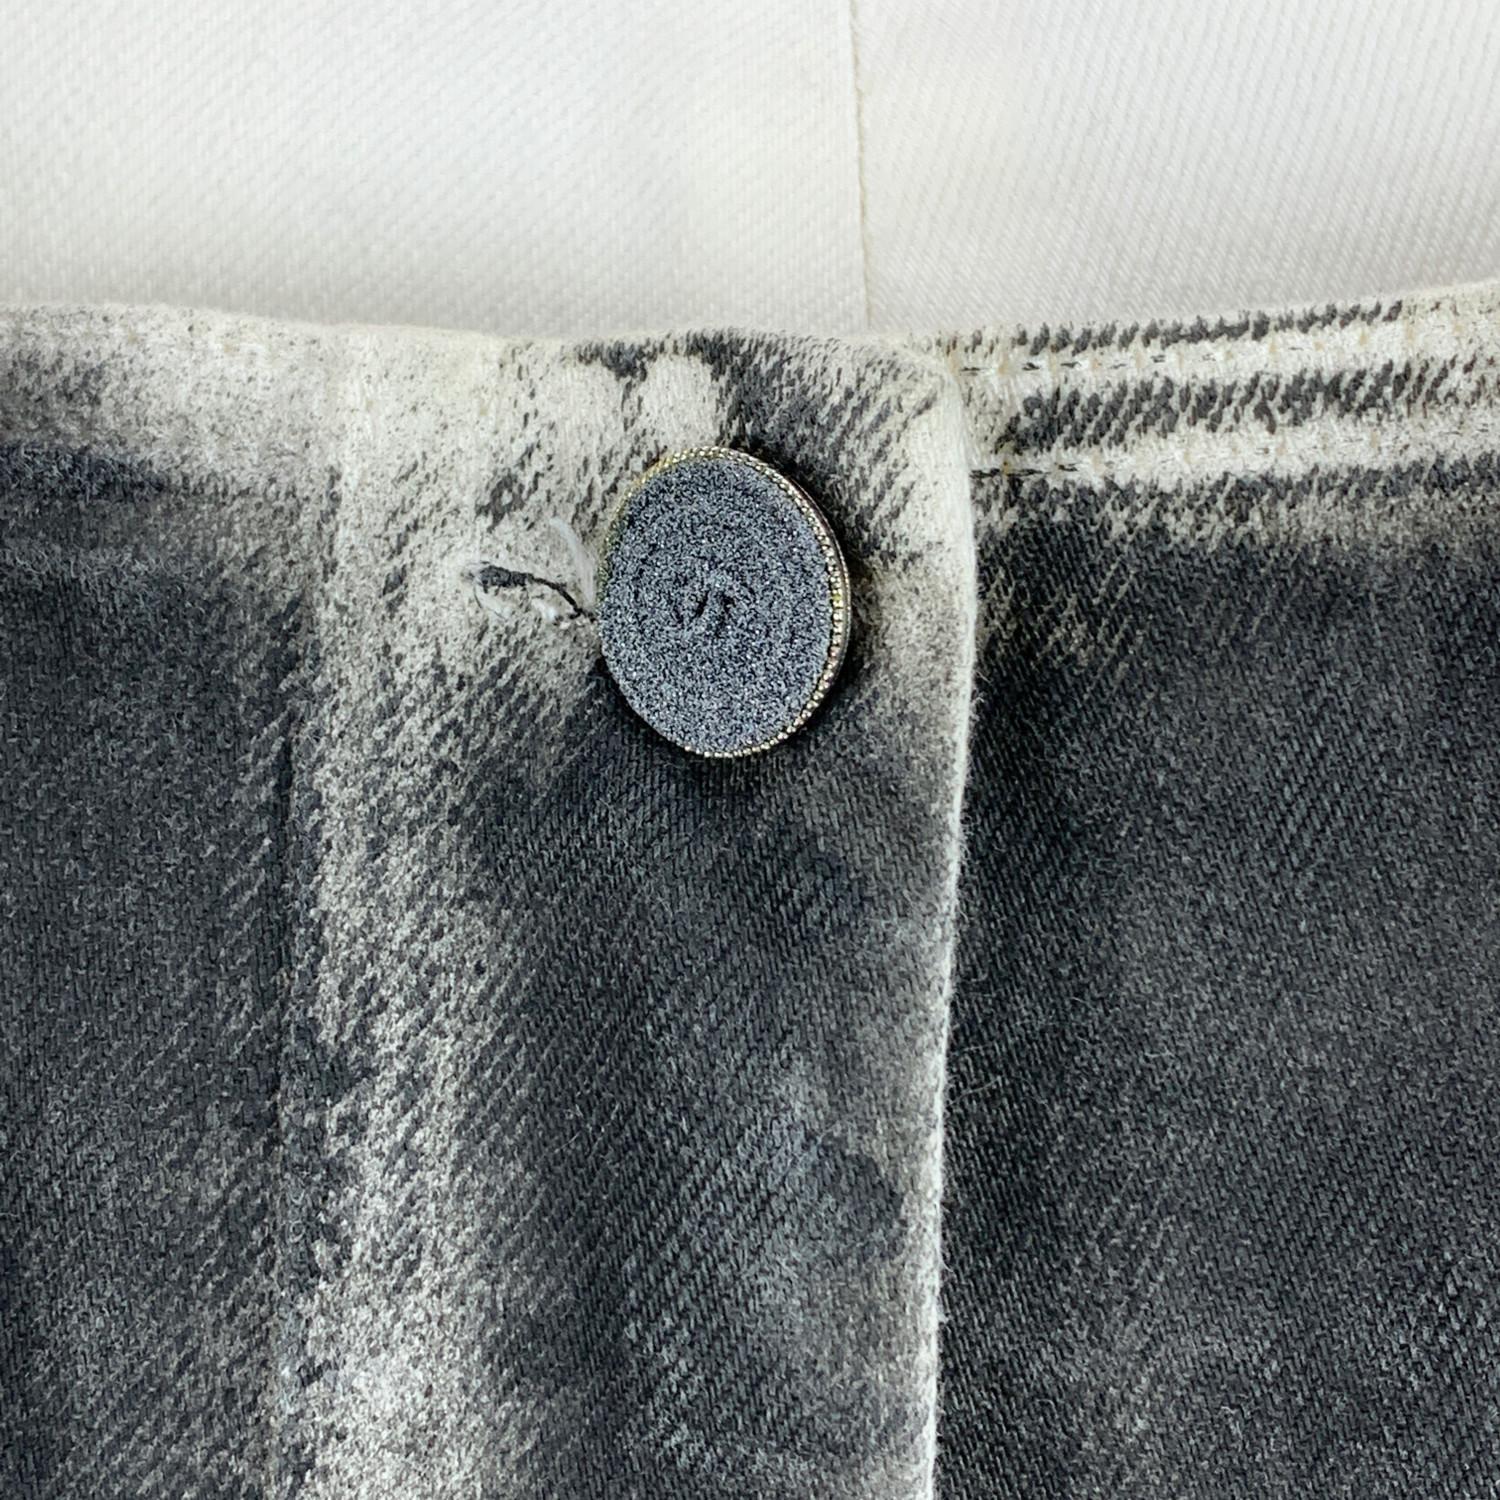 Chanel grey washed out denim jeans. It features belt loops, button and zip closure on the front and skinny design. Designed button. Composition: 98% cotton, 2% elastane. Size 38 FR (it should correspond to a SMALL size)

Details

MATERIAL: